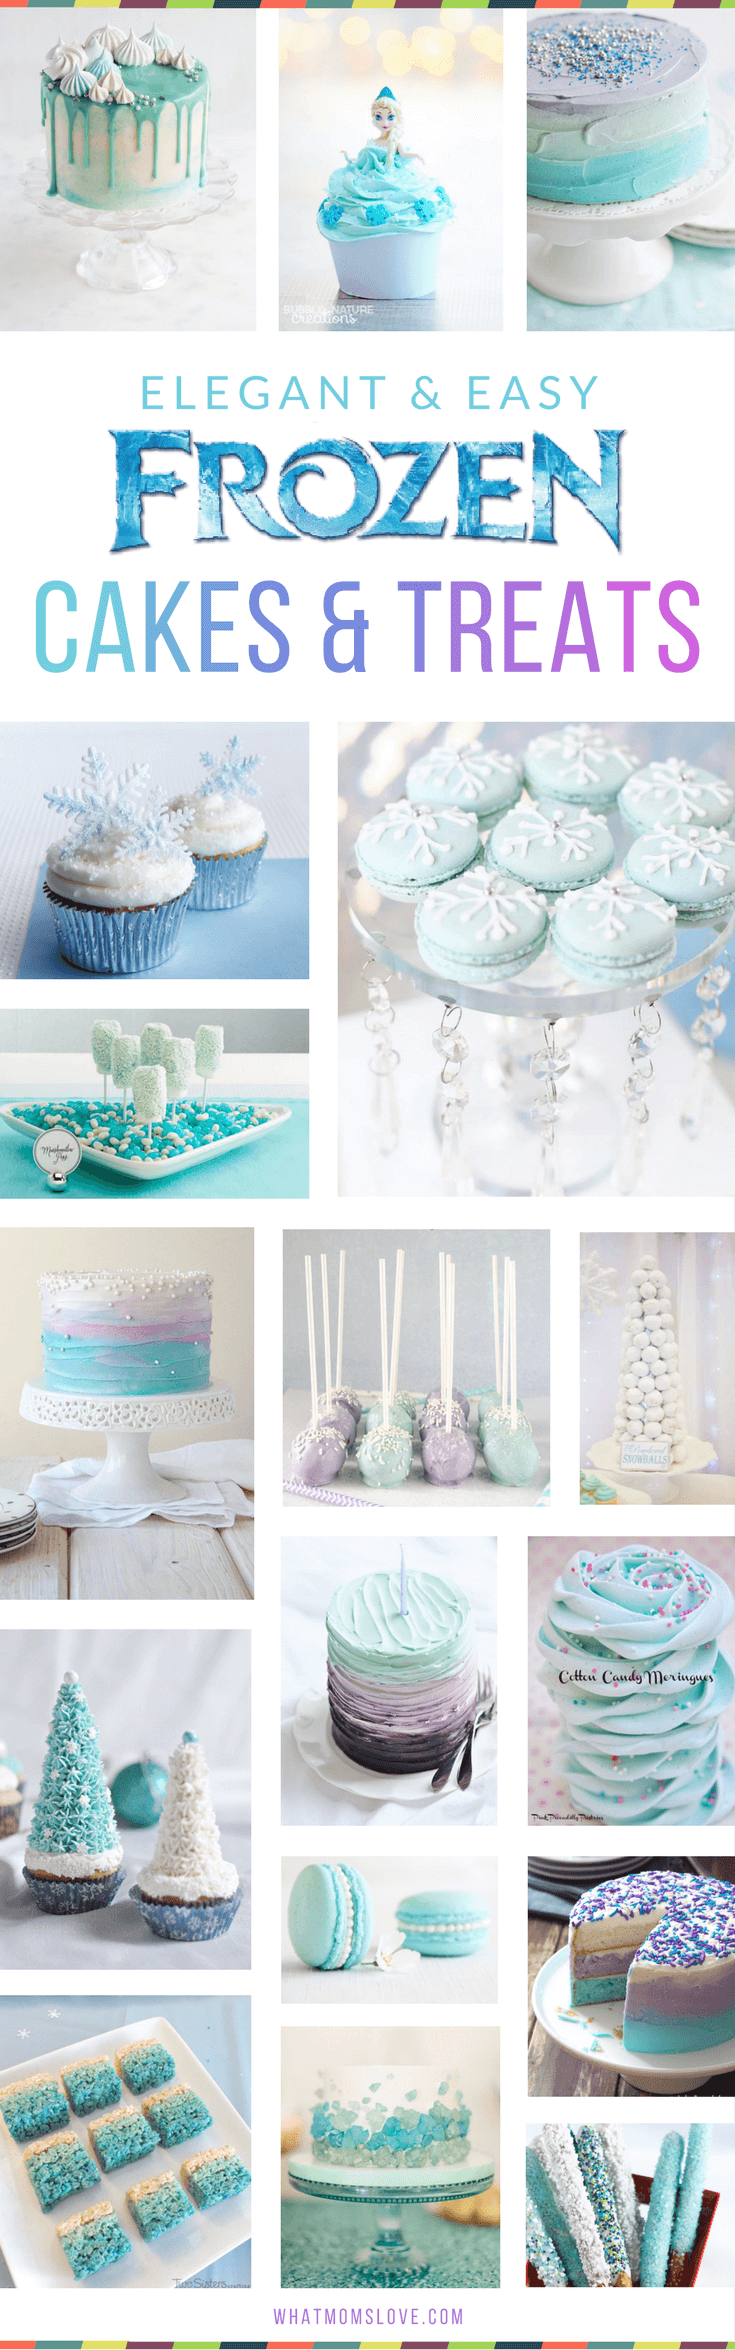 Disney Frozen Cake Ideas for Girls Birthday Party! Easy and elegant ideas that you can actually recreate for a perfect Anna and Elsa themed party - simple homemade cakes, cupcakes, pops, treats, favors and more!